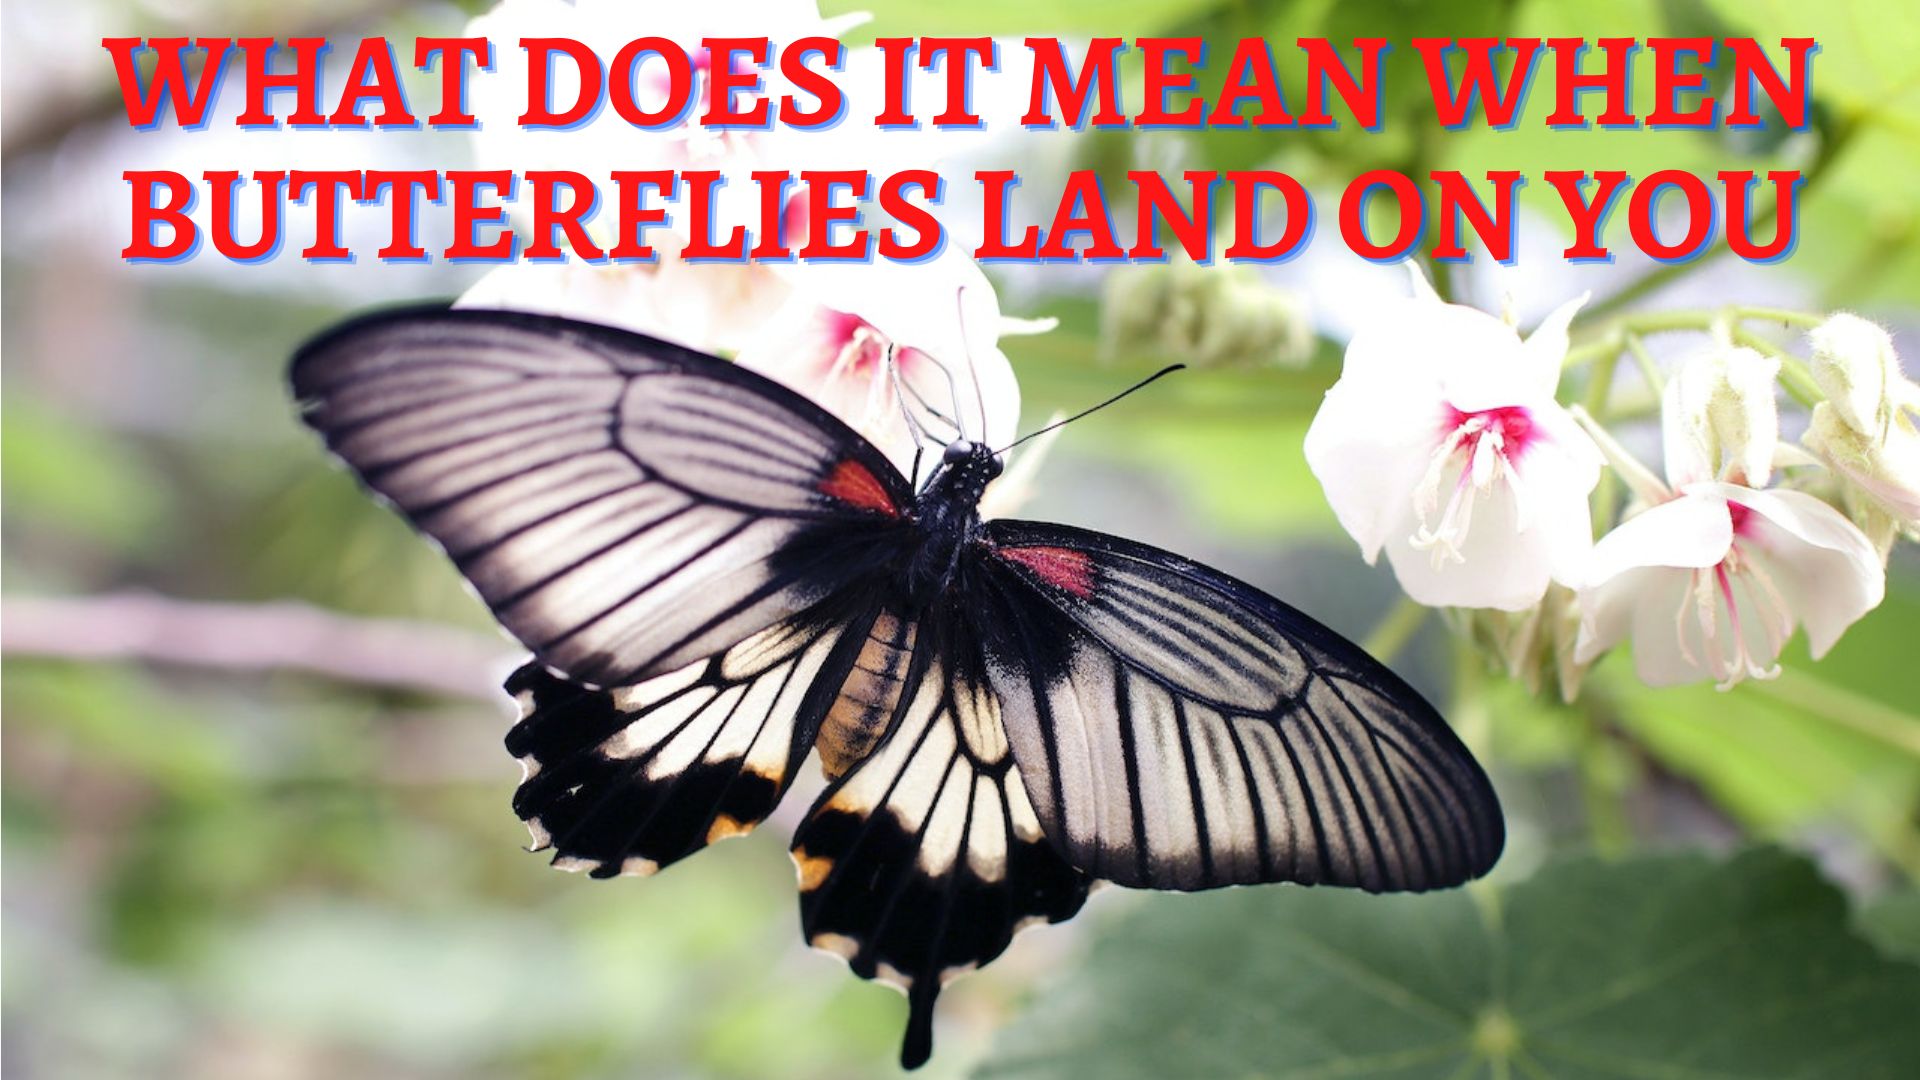 What Does It Mean When Butterflies Land On You?